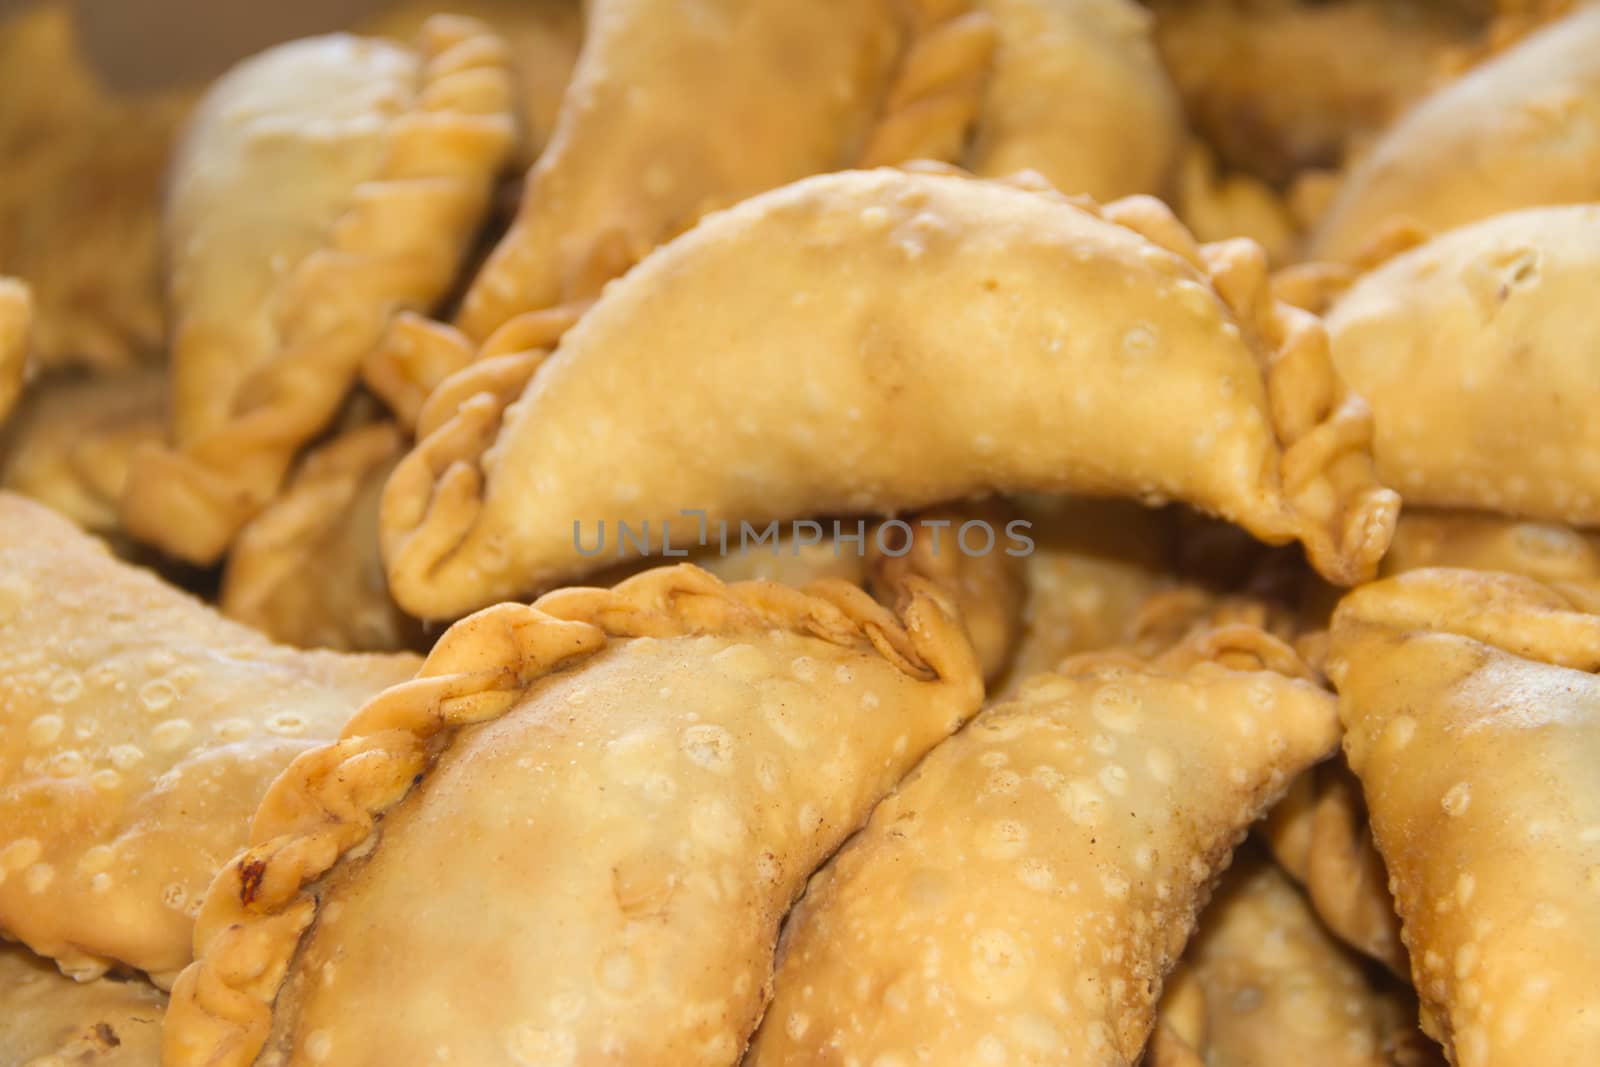 fried empanadas typical of the Argentine countryside gastronomy